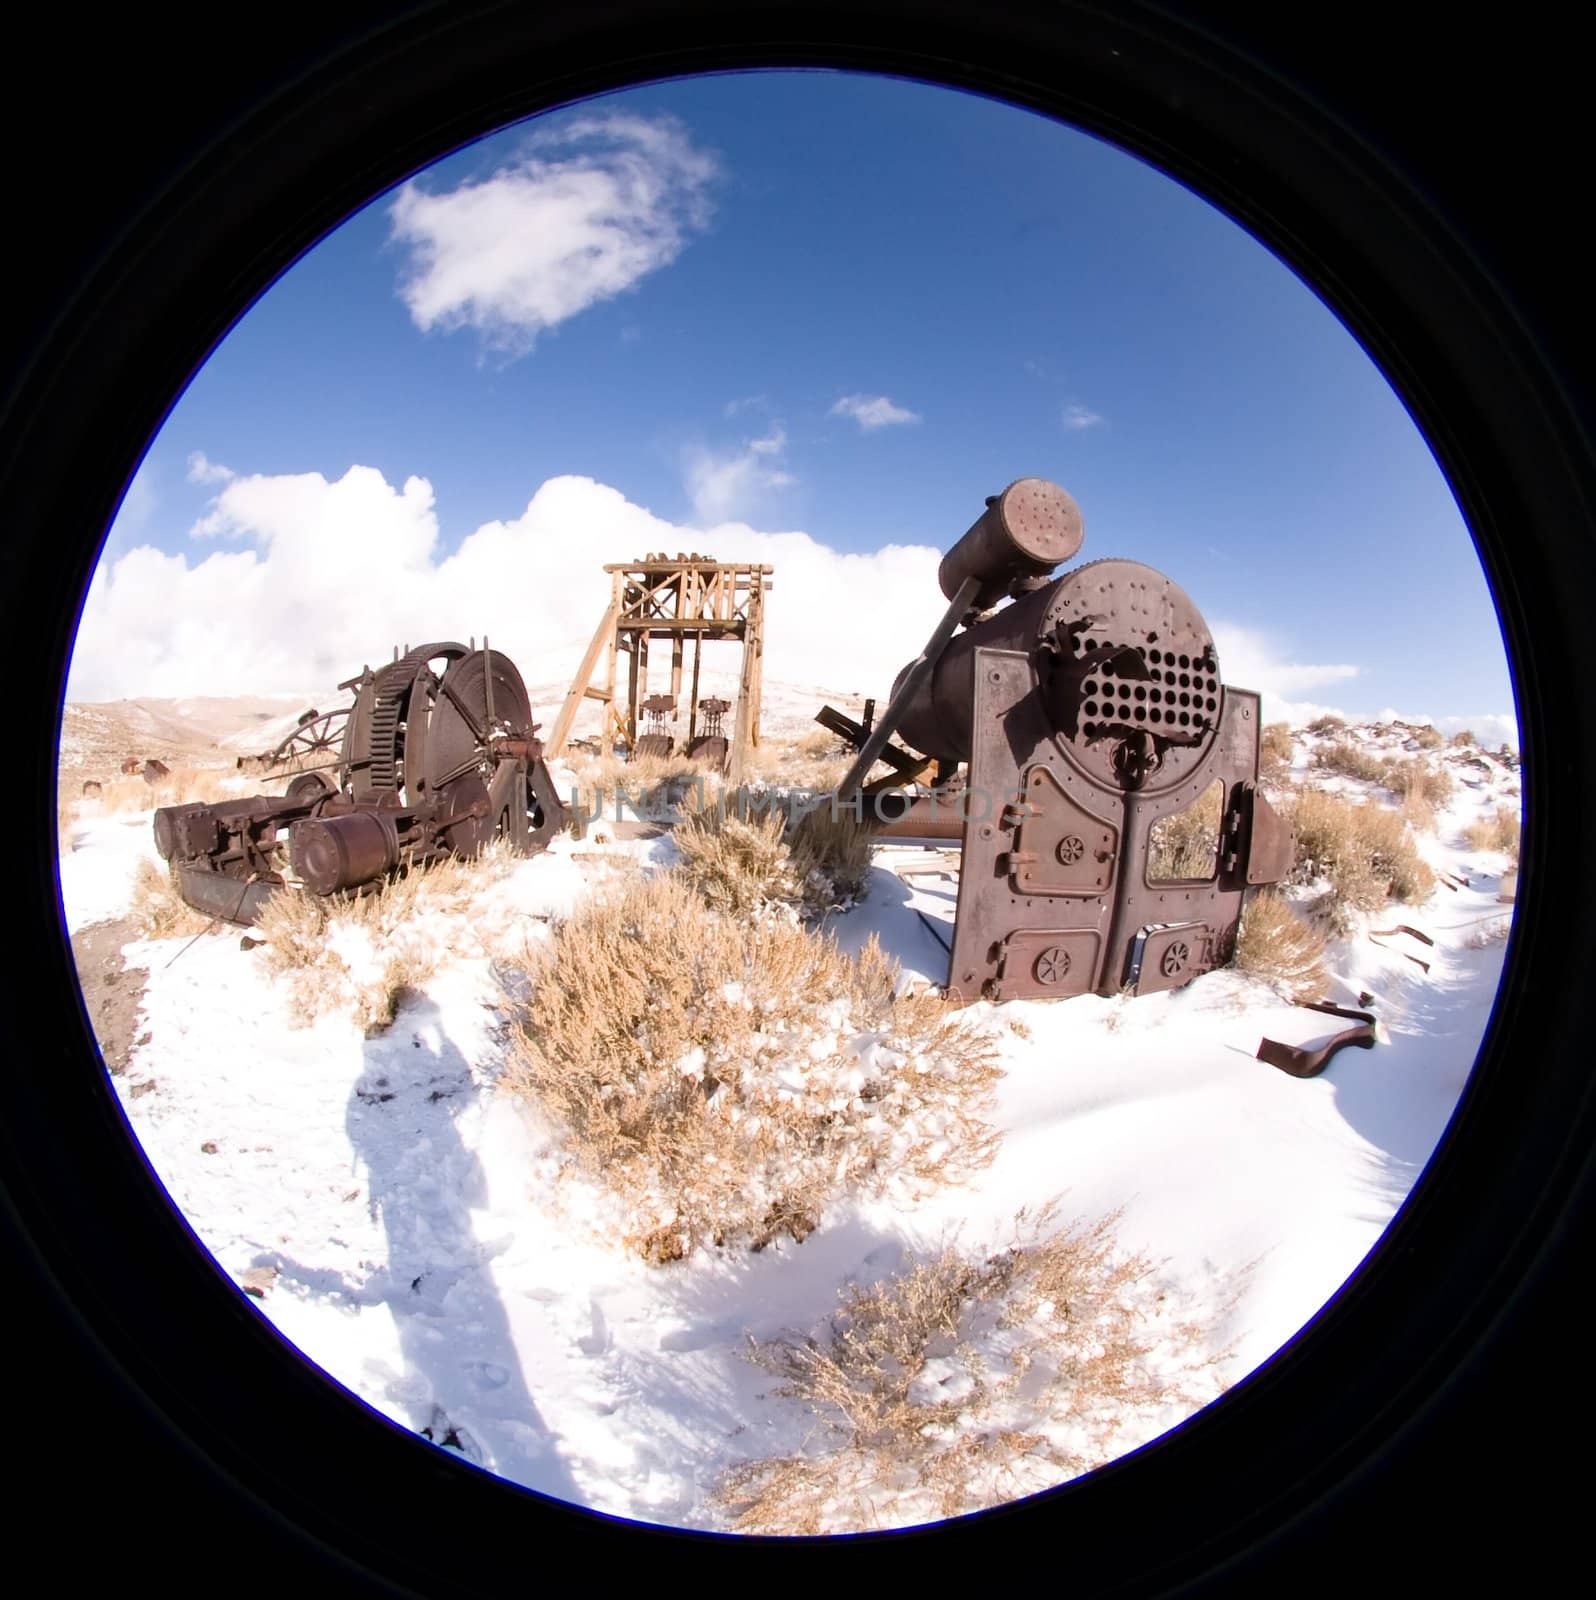 Bodie, a ghost town on the eastern slope of the Sierra Nevada mountain range in Mono County, California